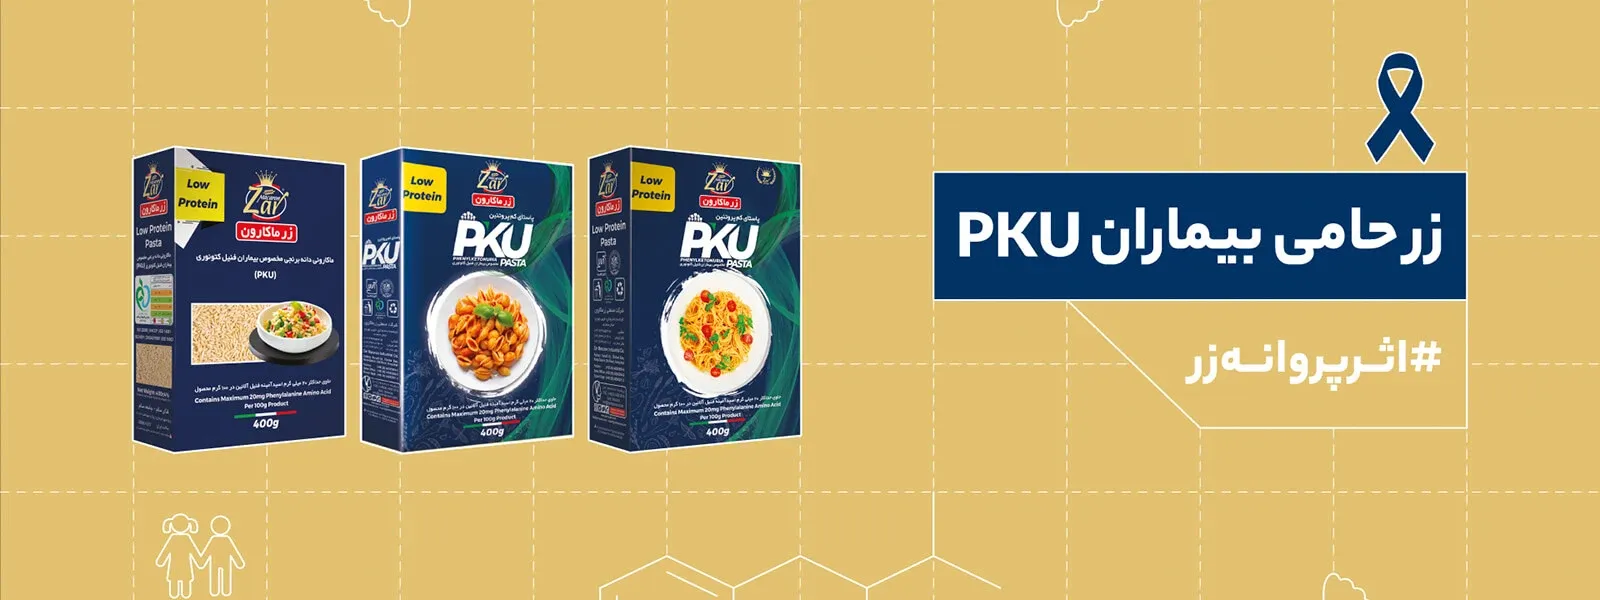 Zar supports PKU patients